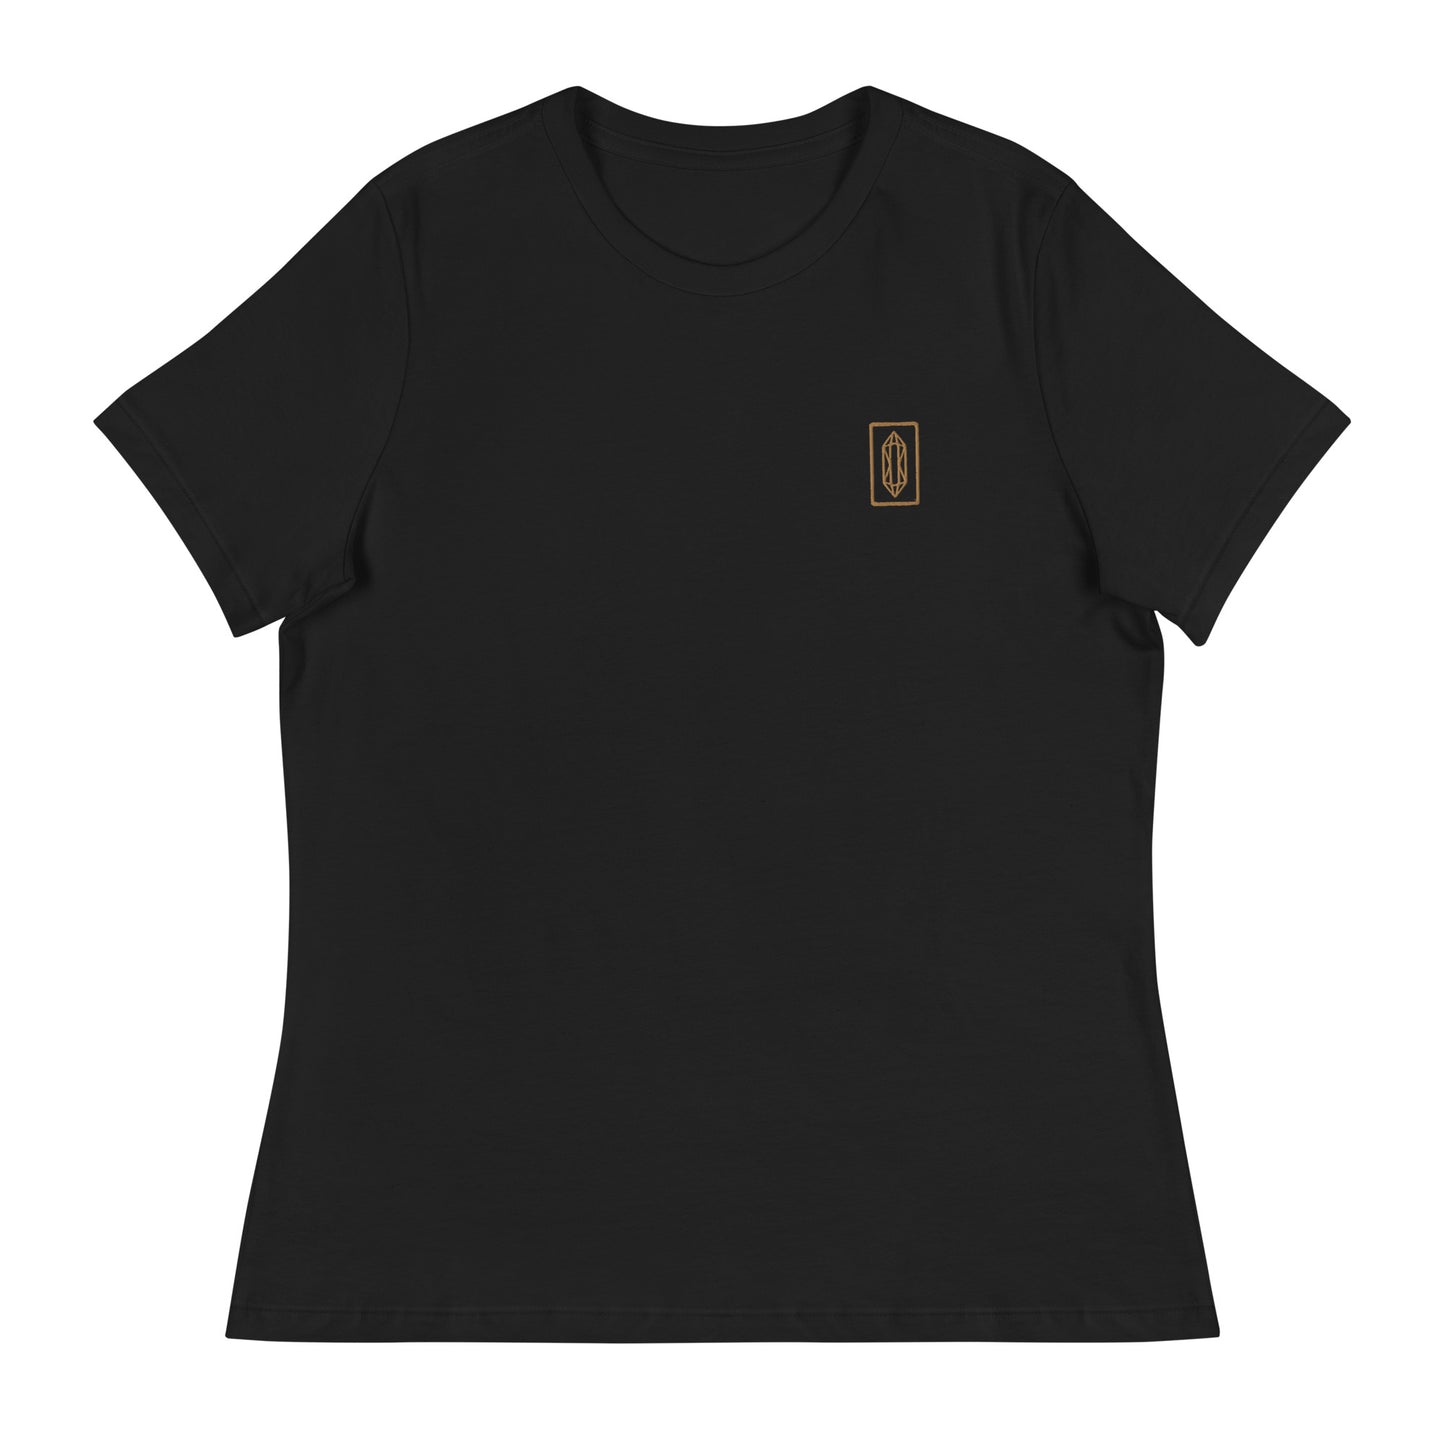 The Crystal Fitted T-Shirt